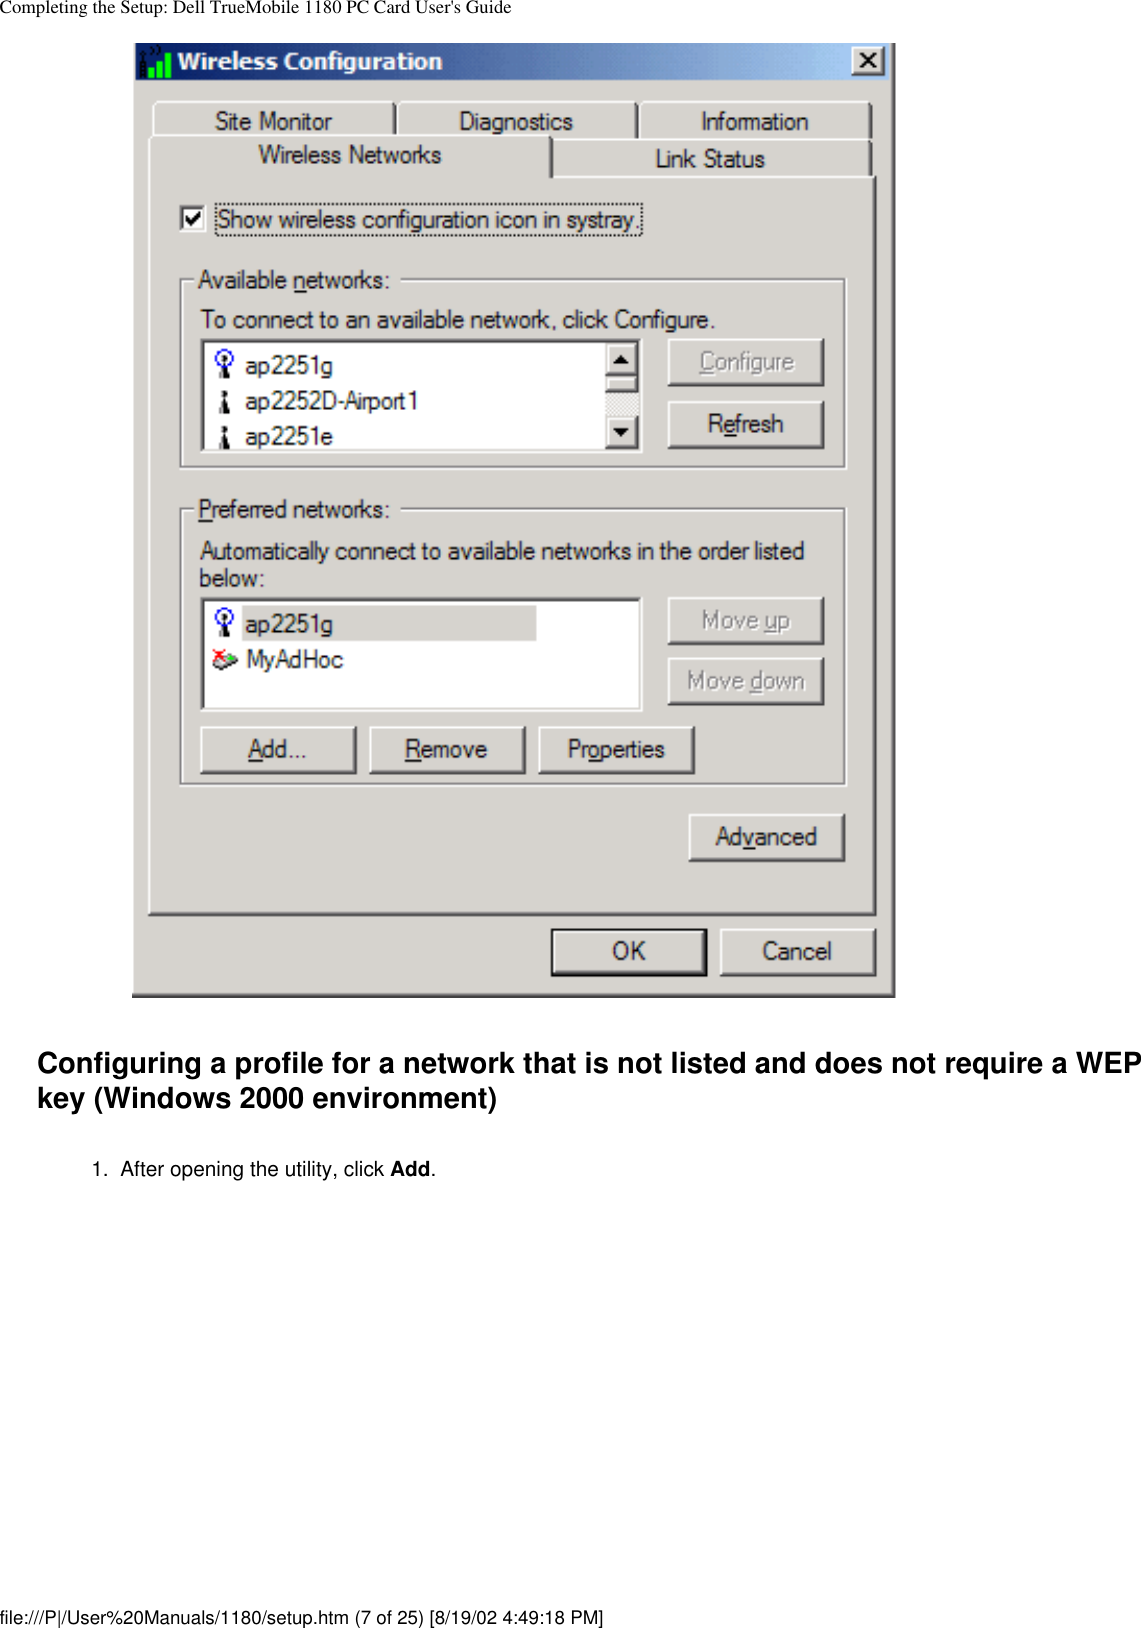 Completing the Setup: Dell TrueMobile 1180 PC Card User&apos;s GuideConfiguring a profile for a network that is not listed and does not require a WEP key (Windows 2000 environment)1.  After opening the utility, click Add. file:///P|/User%20Manuals/1180/setup.htm (7 of 25) [8/19/02 4:49:18 PM]